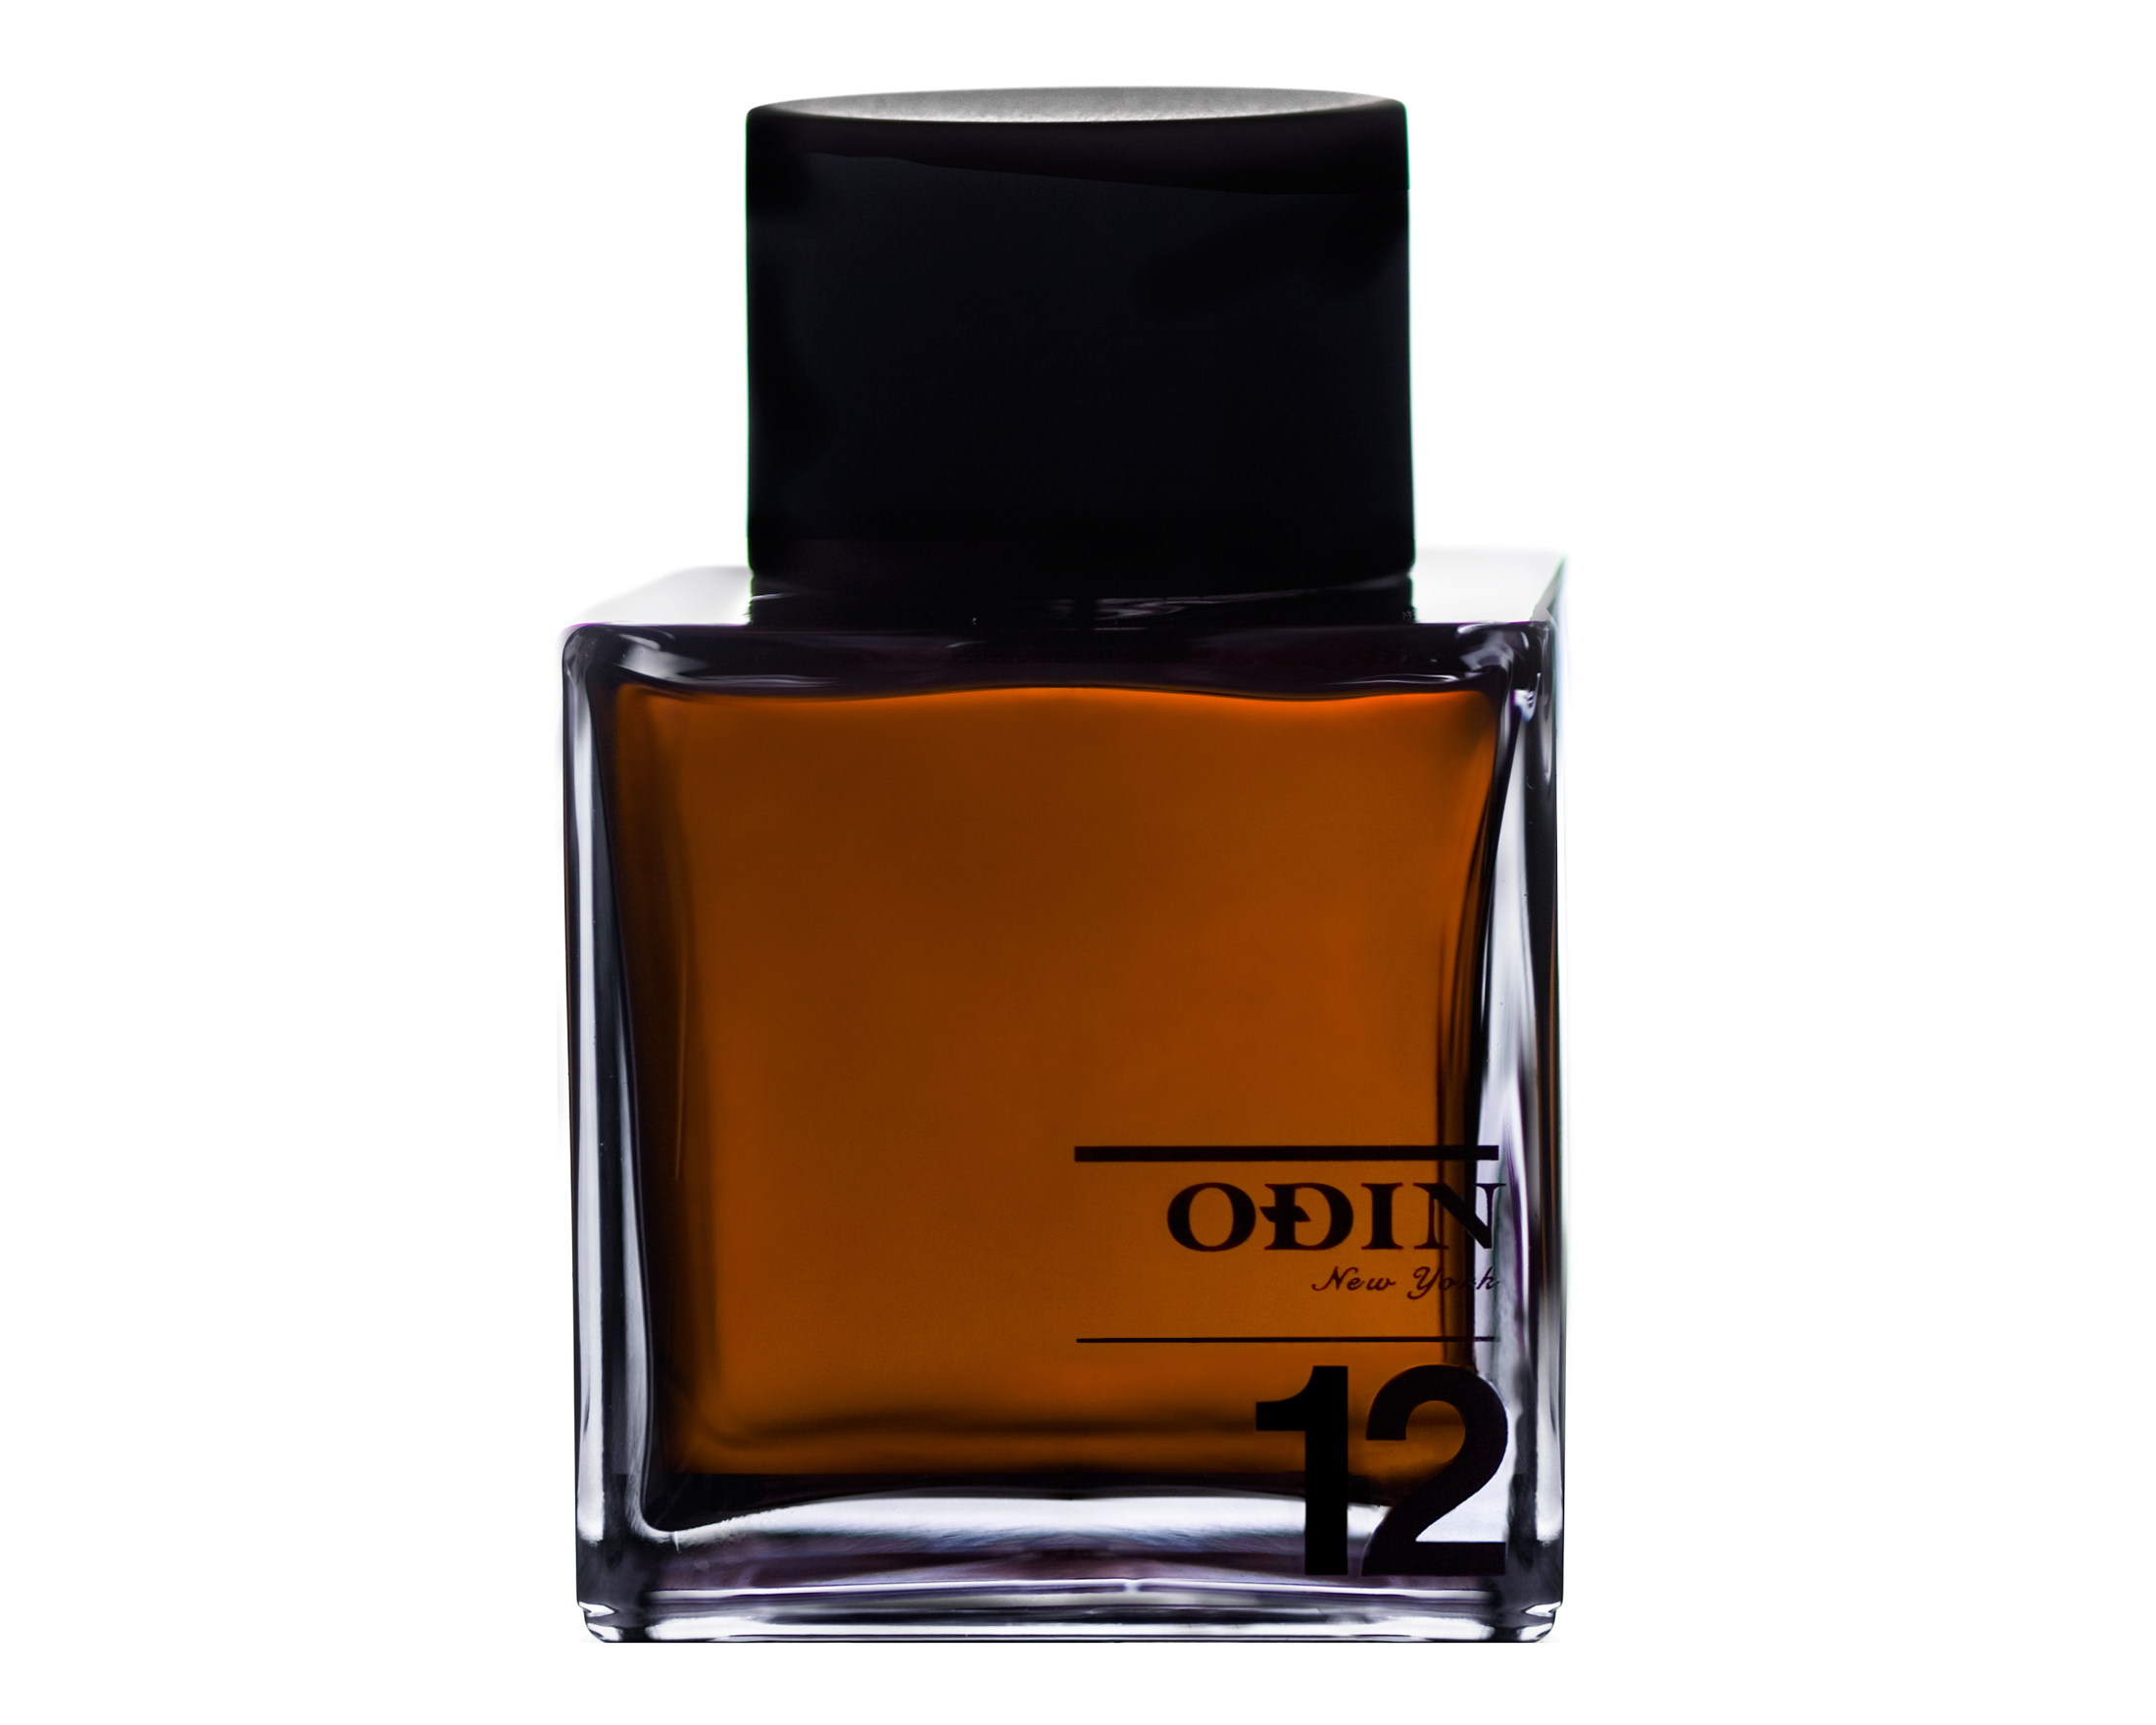 10 Top Best Perfumes for Women Reviewed 2015